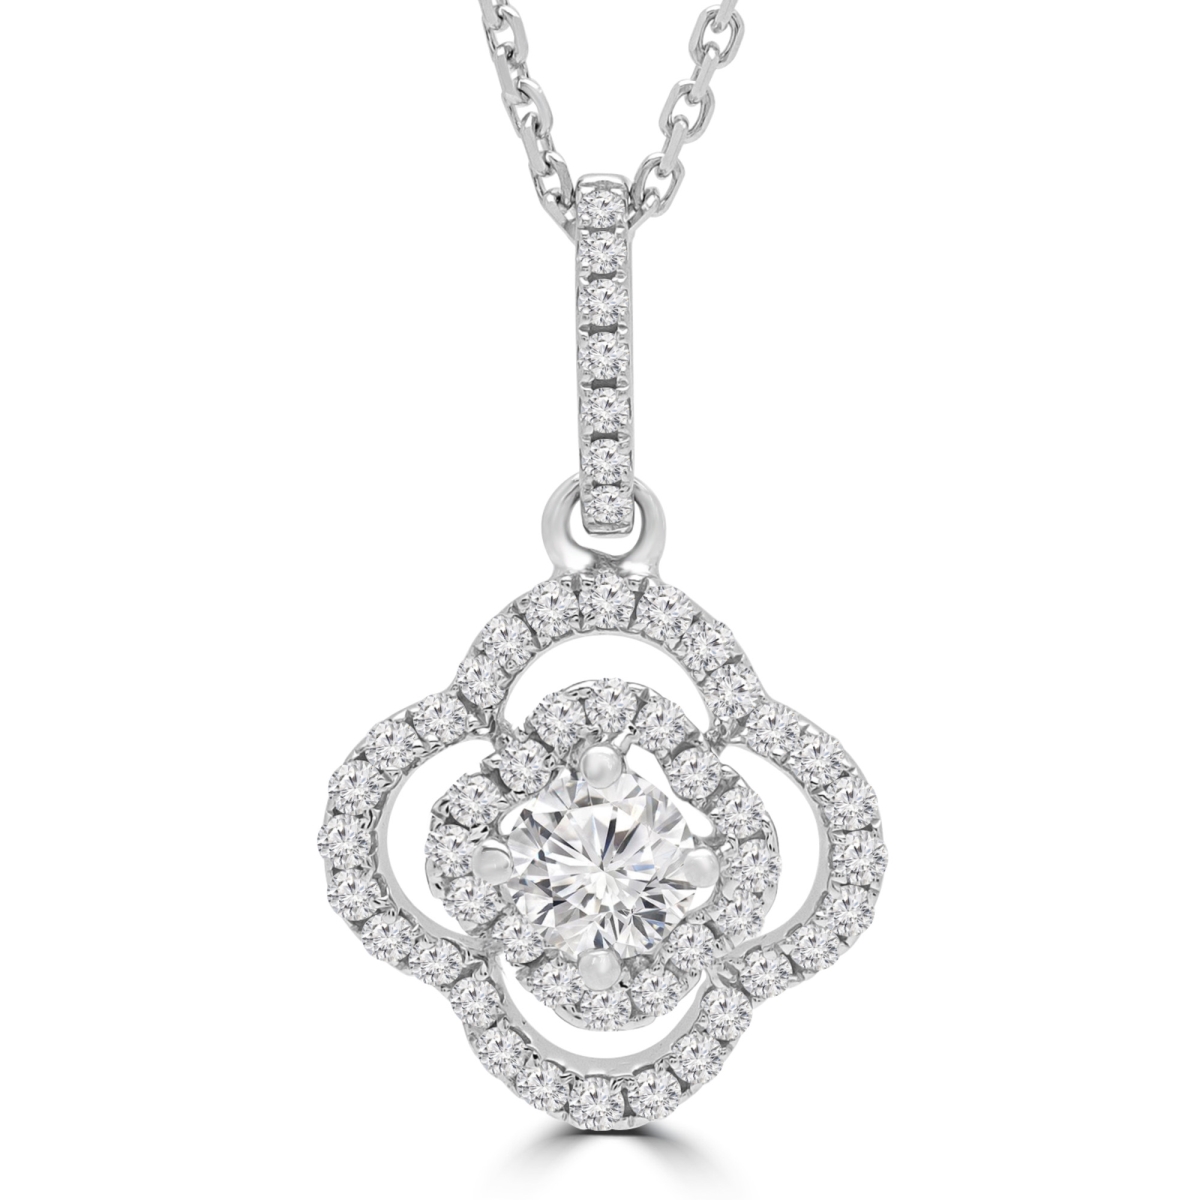 Md190525 0.63 Ctw Round Diamond Clover Halo Pendant Necklace In 18k White Gold